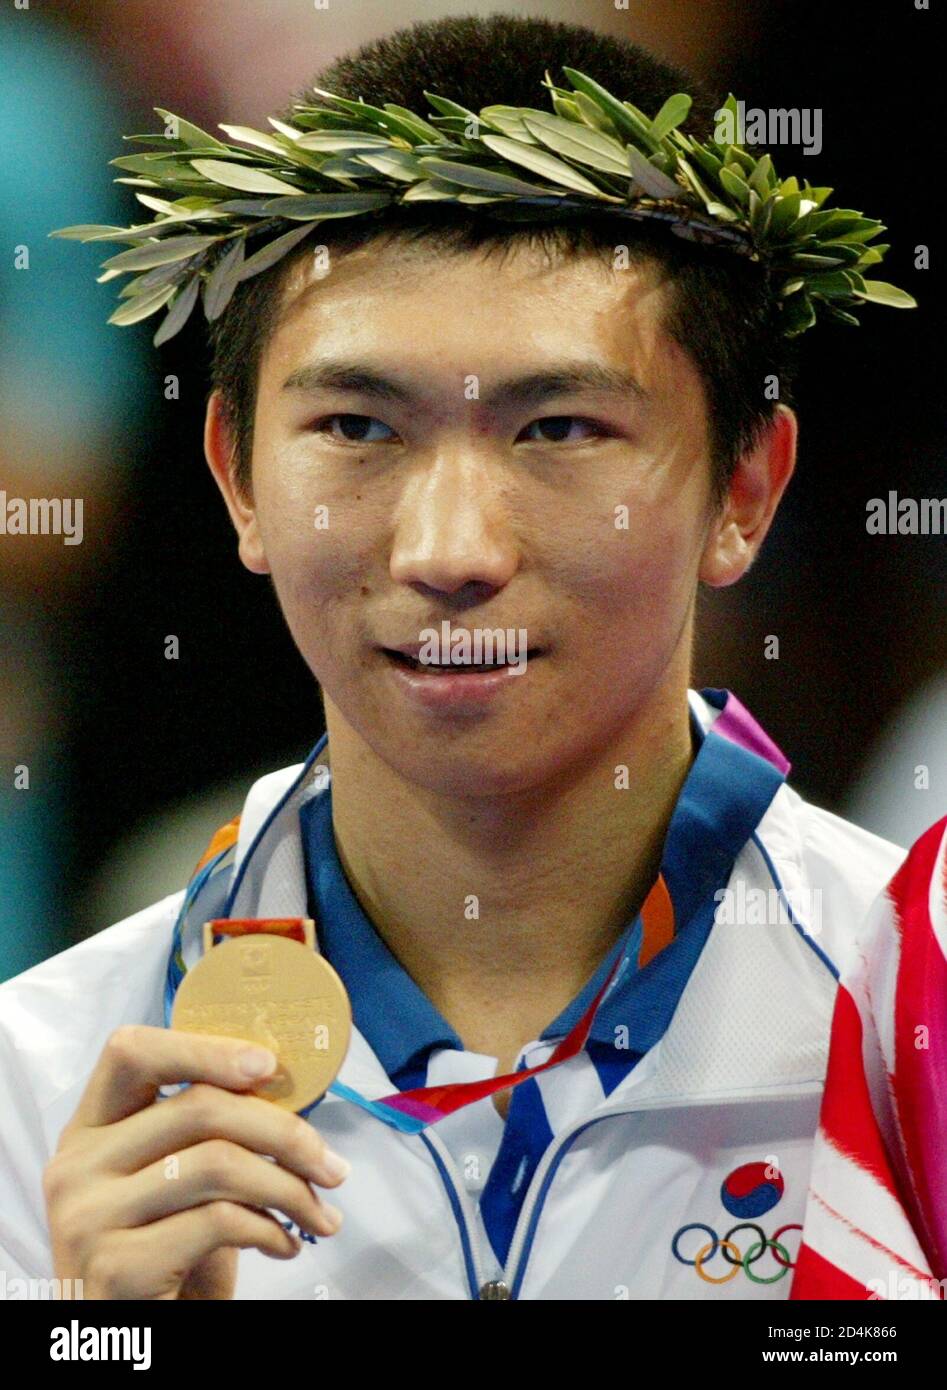 South Korea's Ryu Seung min displays his gold medal for the men's singles table tennis at the Athens 2004 Olympic Summer Games August 23, 2004. [Ryu won the gold ahead of China's Wang Hao and China's Wang Liqin.] Stock Photo